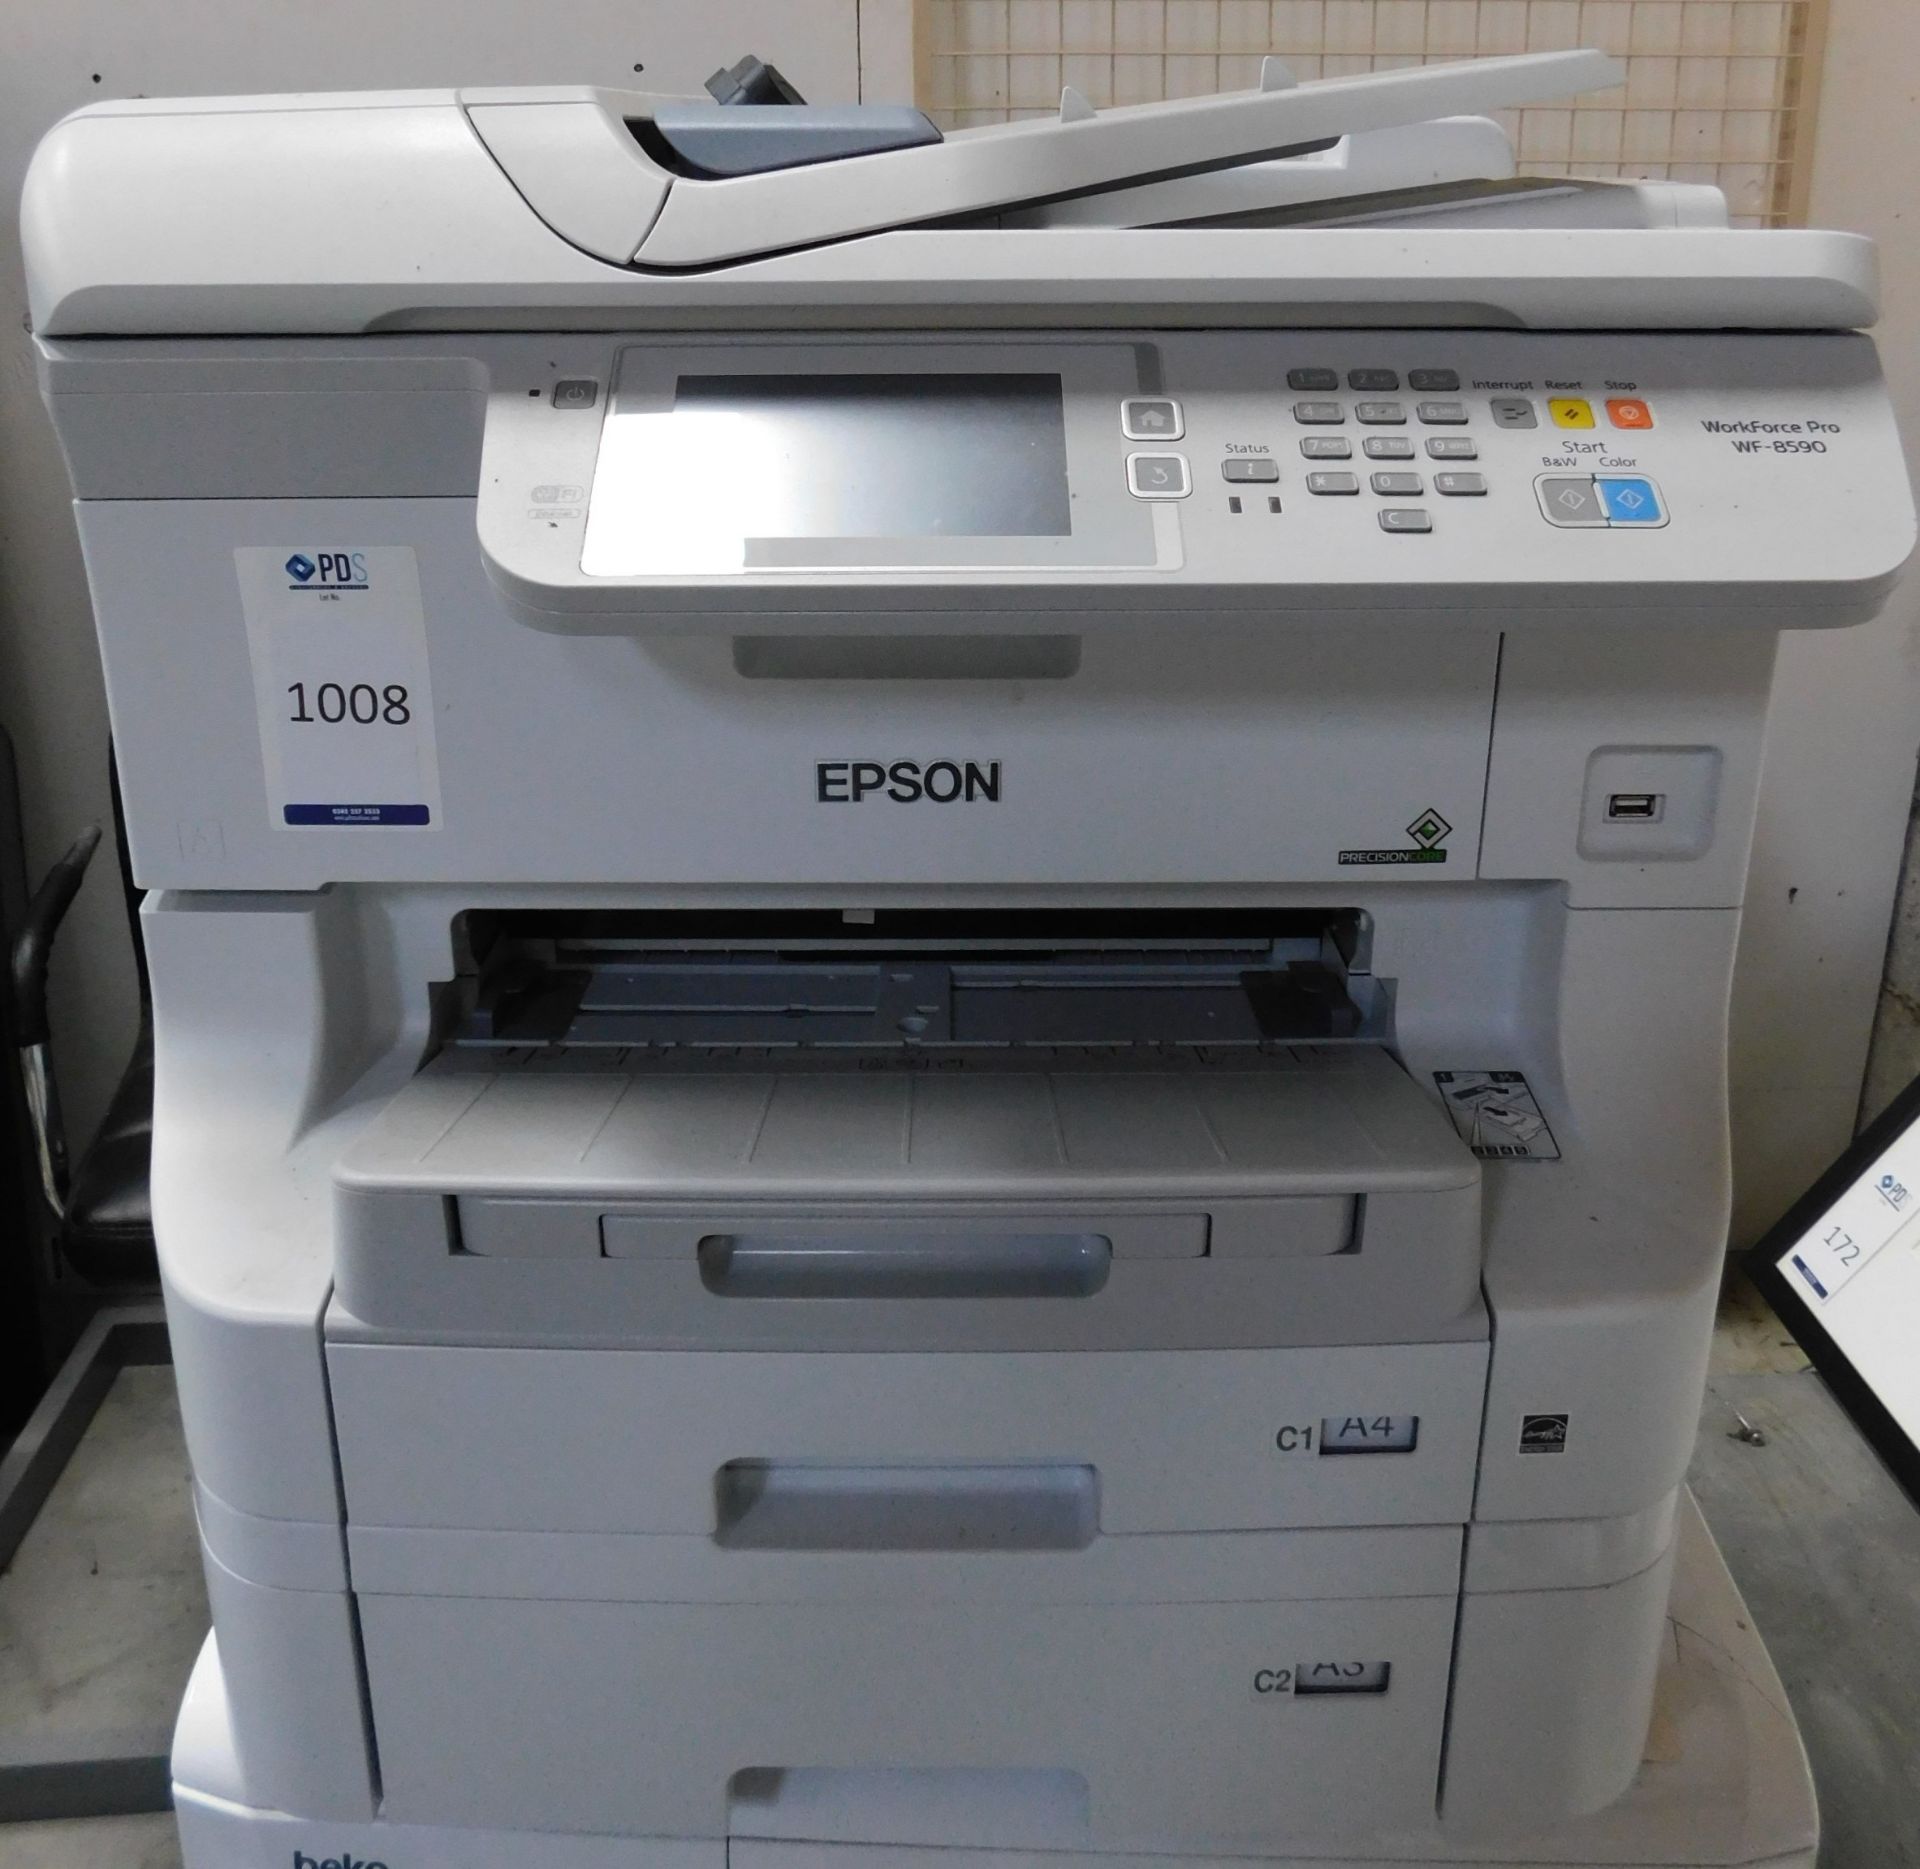 Epson workforce Pro WF-8590 printer (Located Brentwood - See General Notes for More Details)